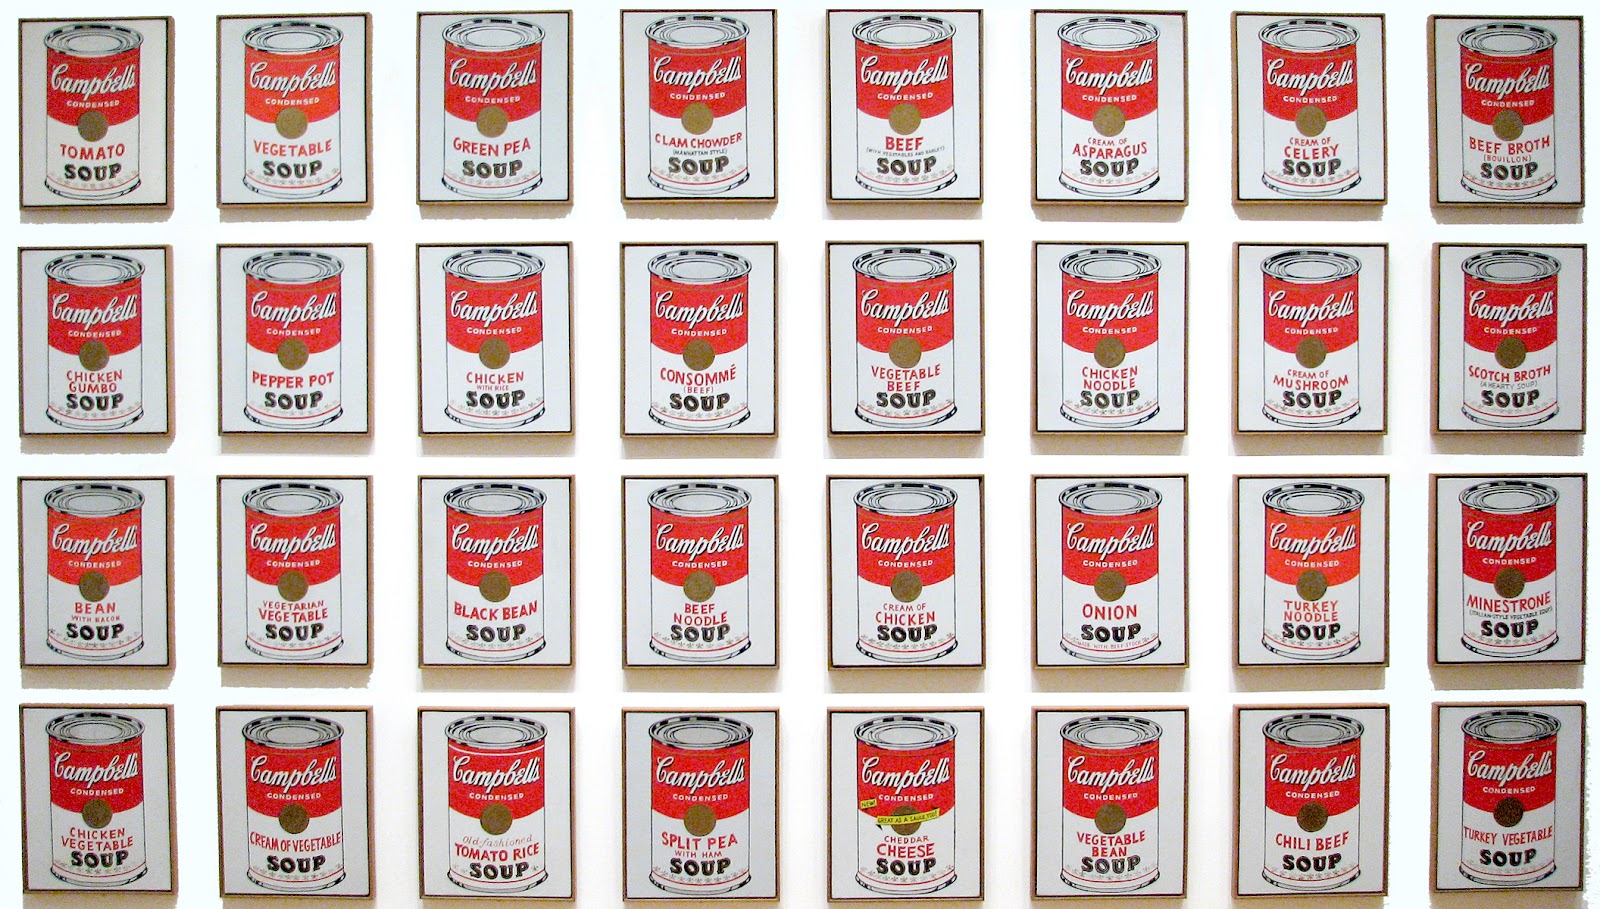 Campbell's Soup Cans by Andy Warhol - 1962 - 50.8 x 40.6 cm Museum of Modern Art